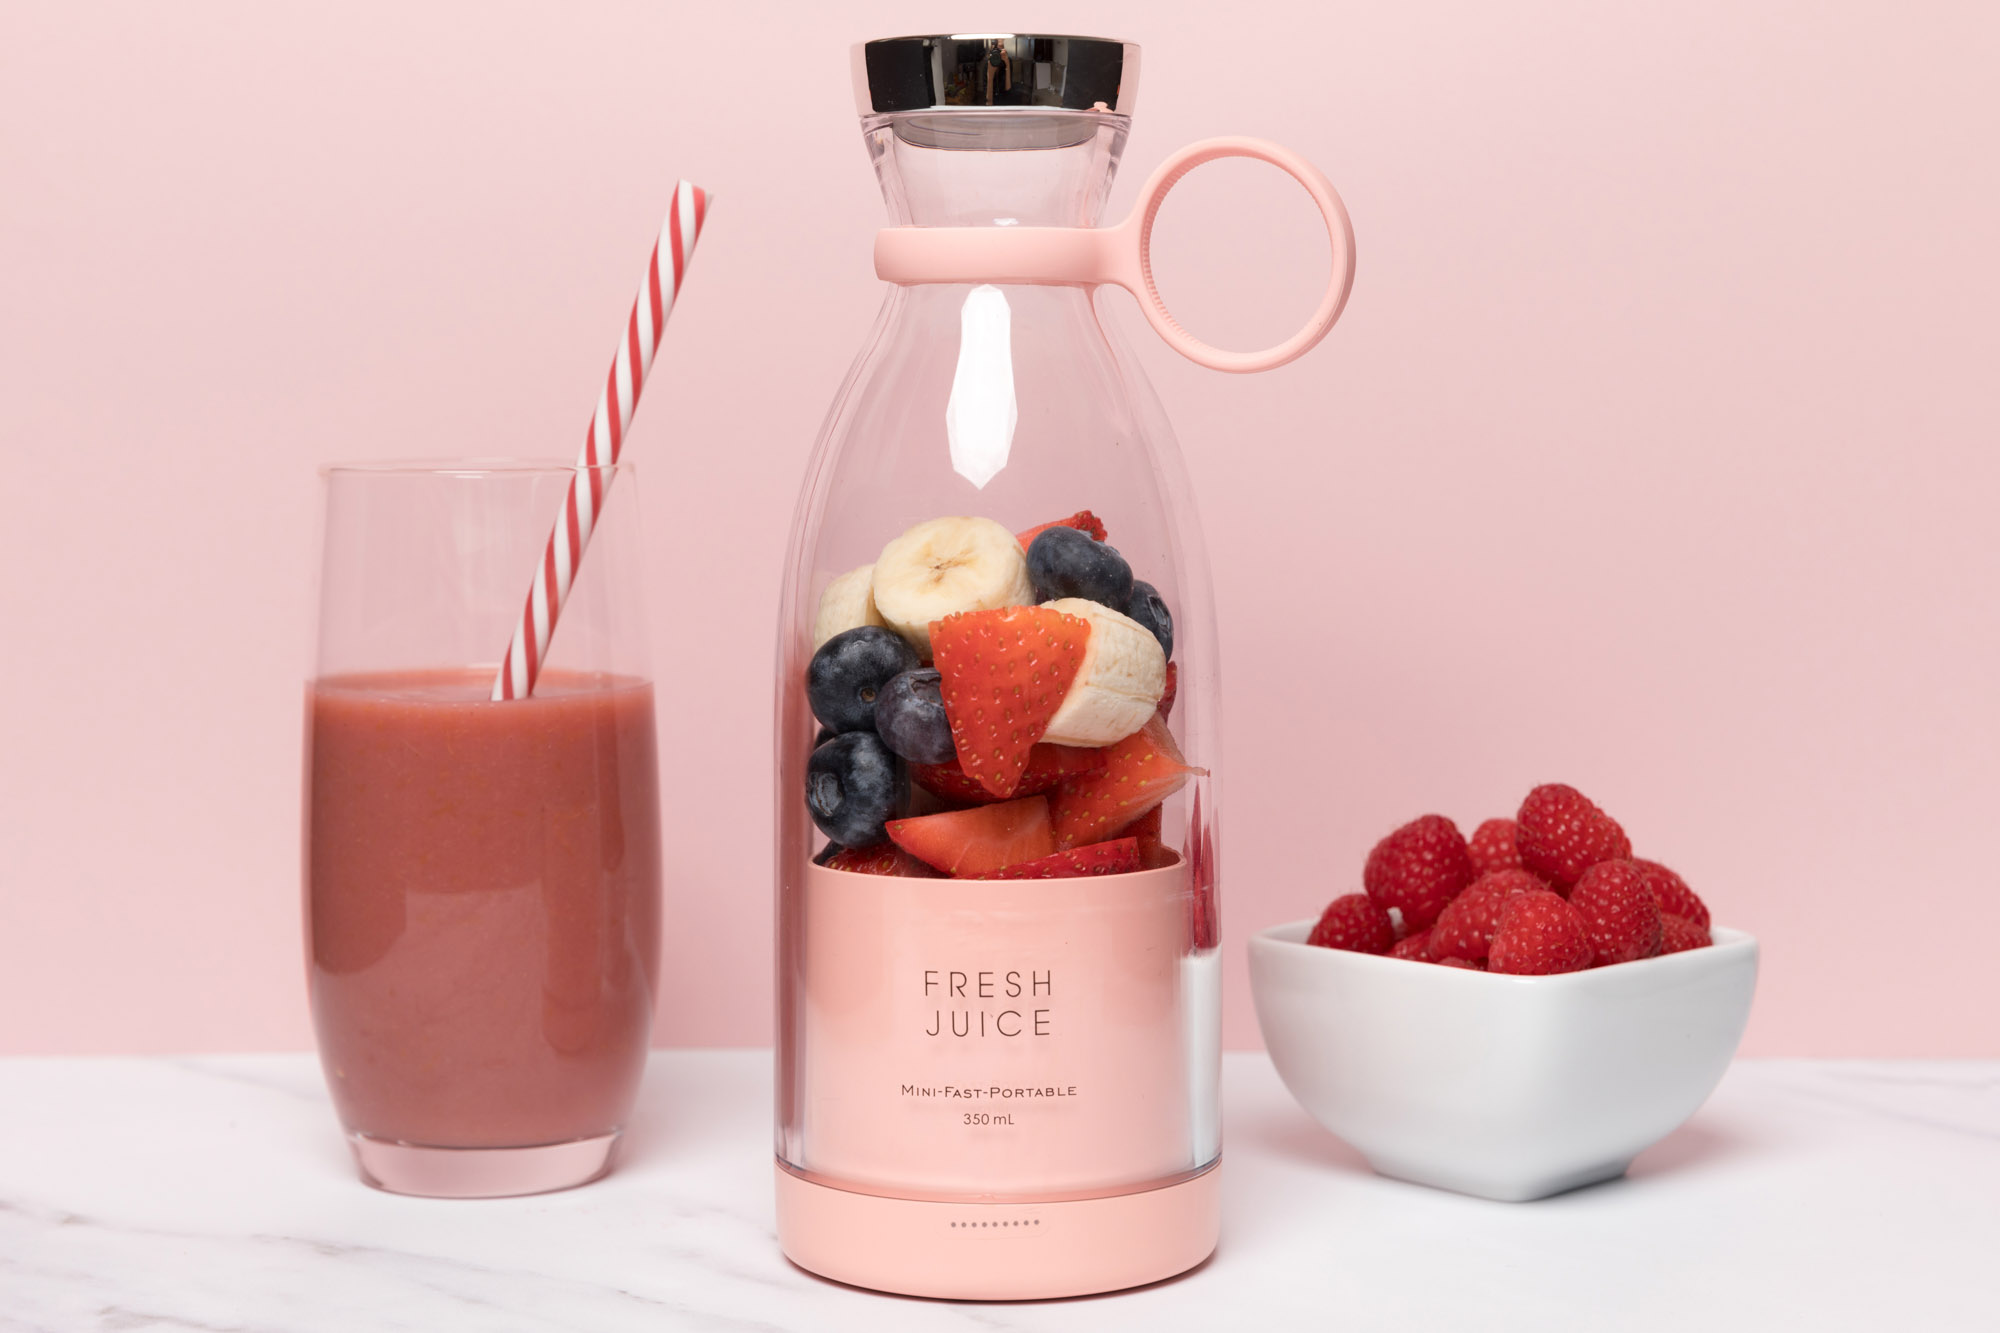 A smoothie maker showing product photography in croydon & london